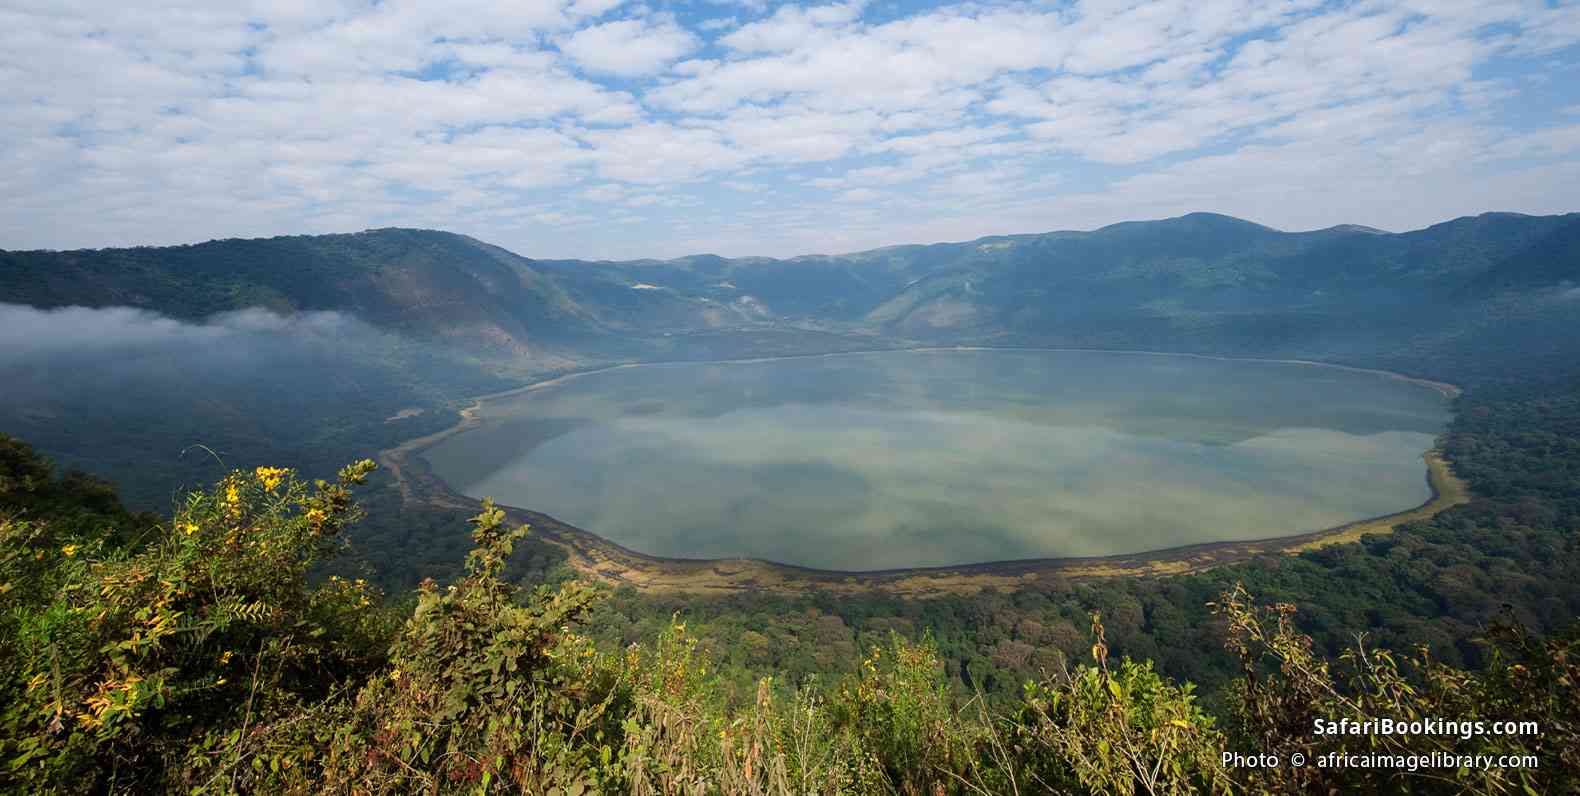 Empekaai crater in the Ngorongoro Conservation Area